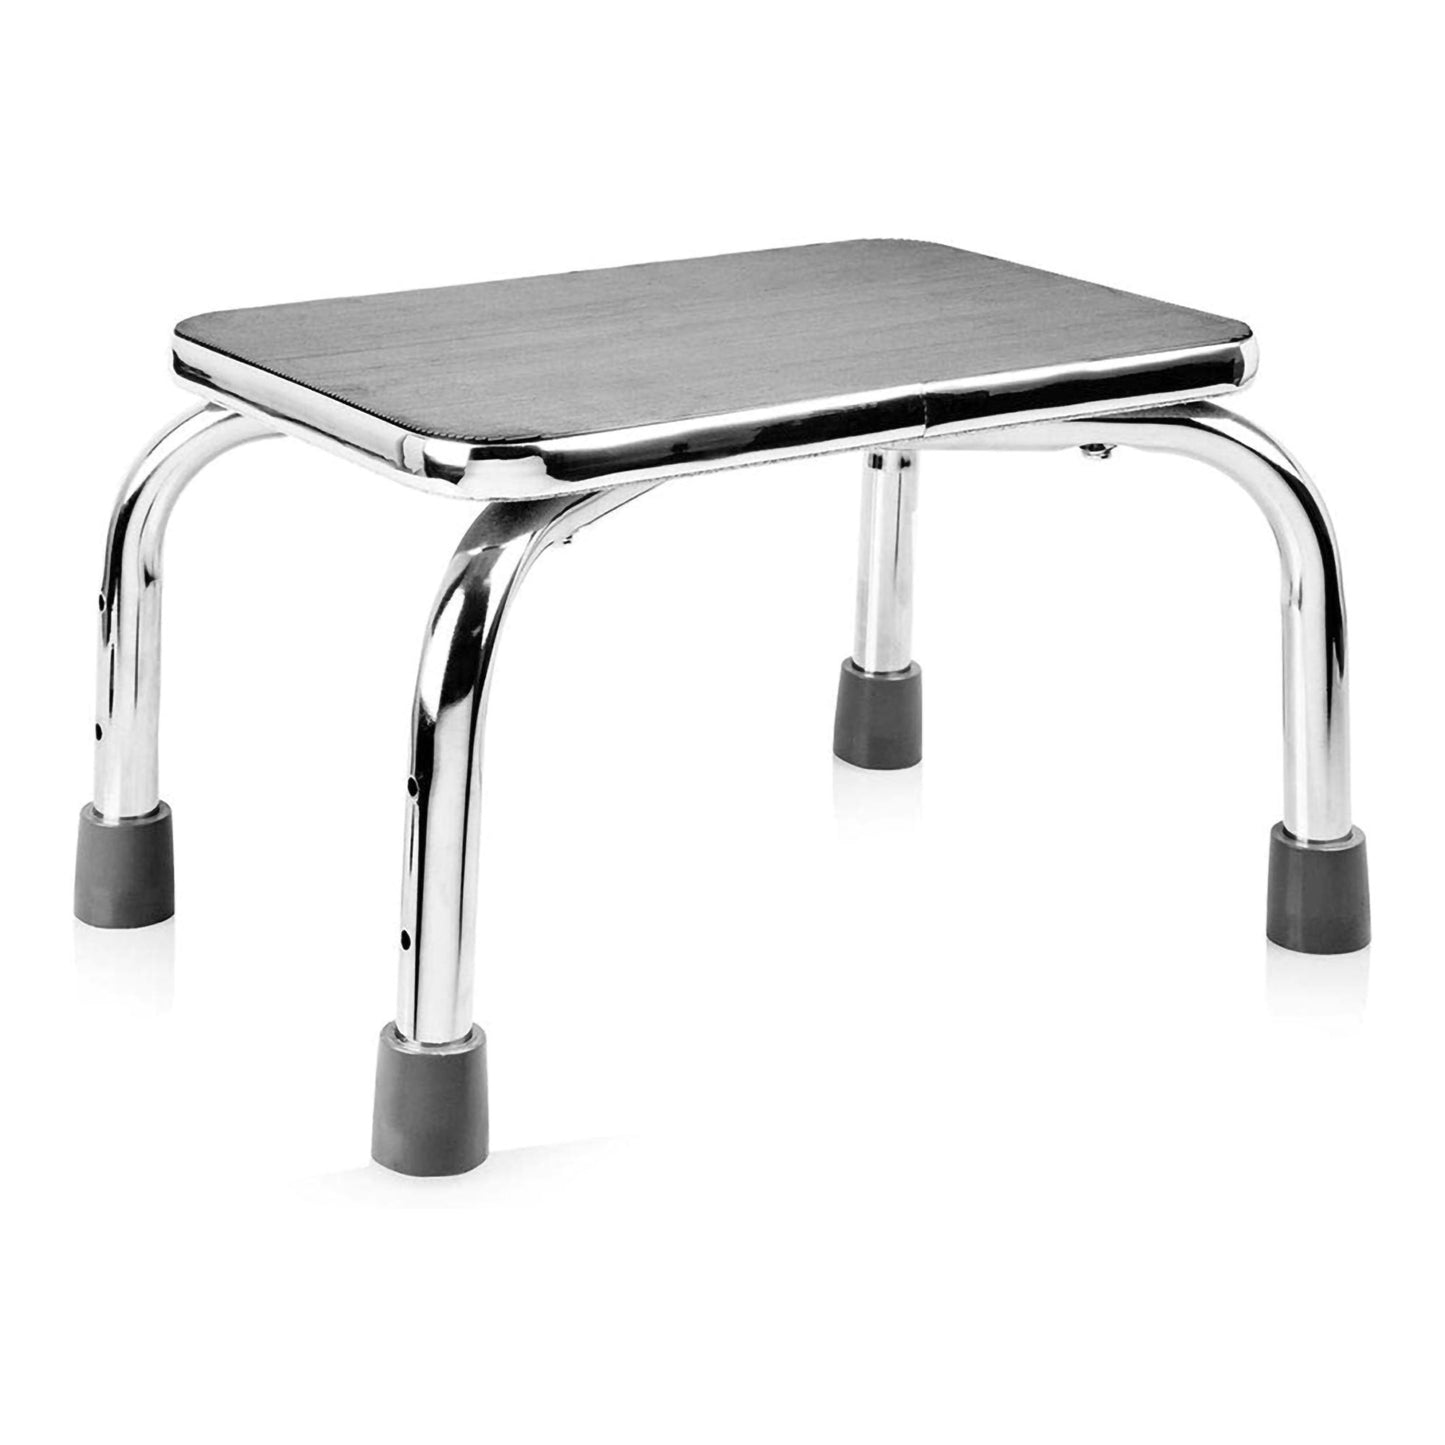 Mabis Healthcare Heavy Duty Step Stool, Sold As 1/Each Mabis 539-1901-0000